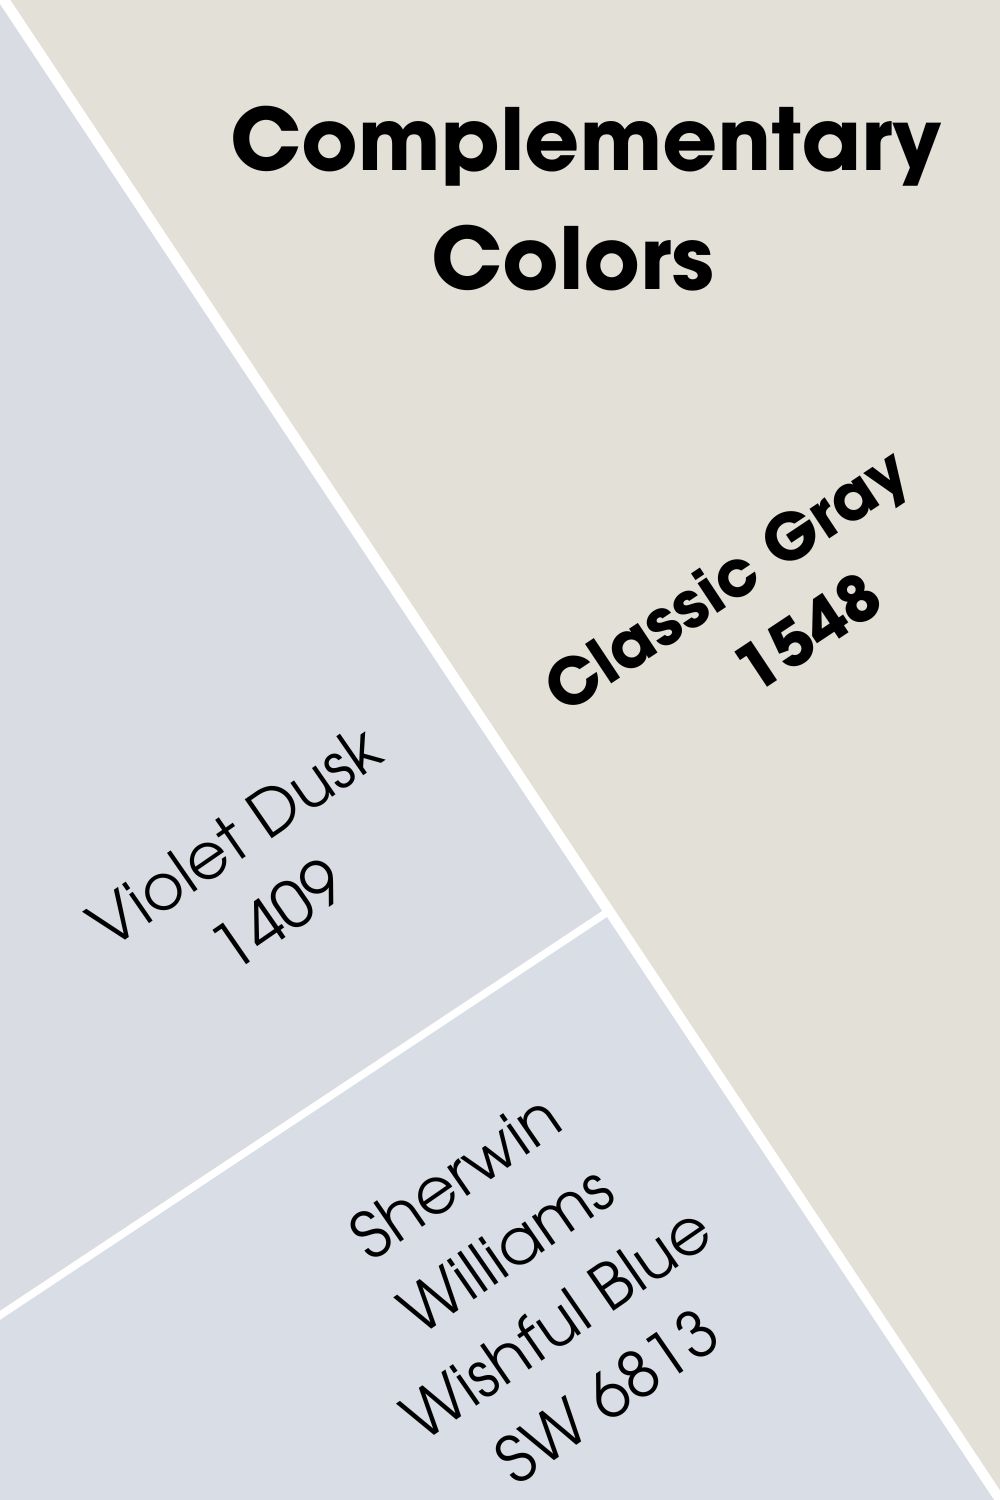 Classic Gray Complementary Colors